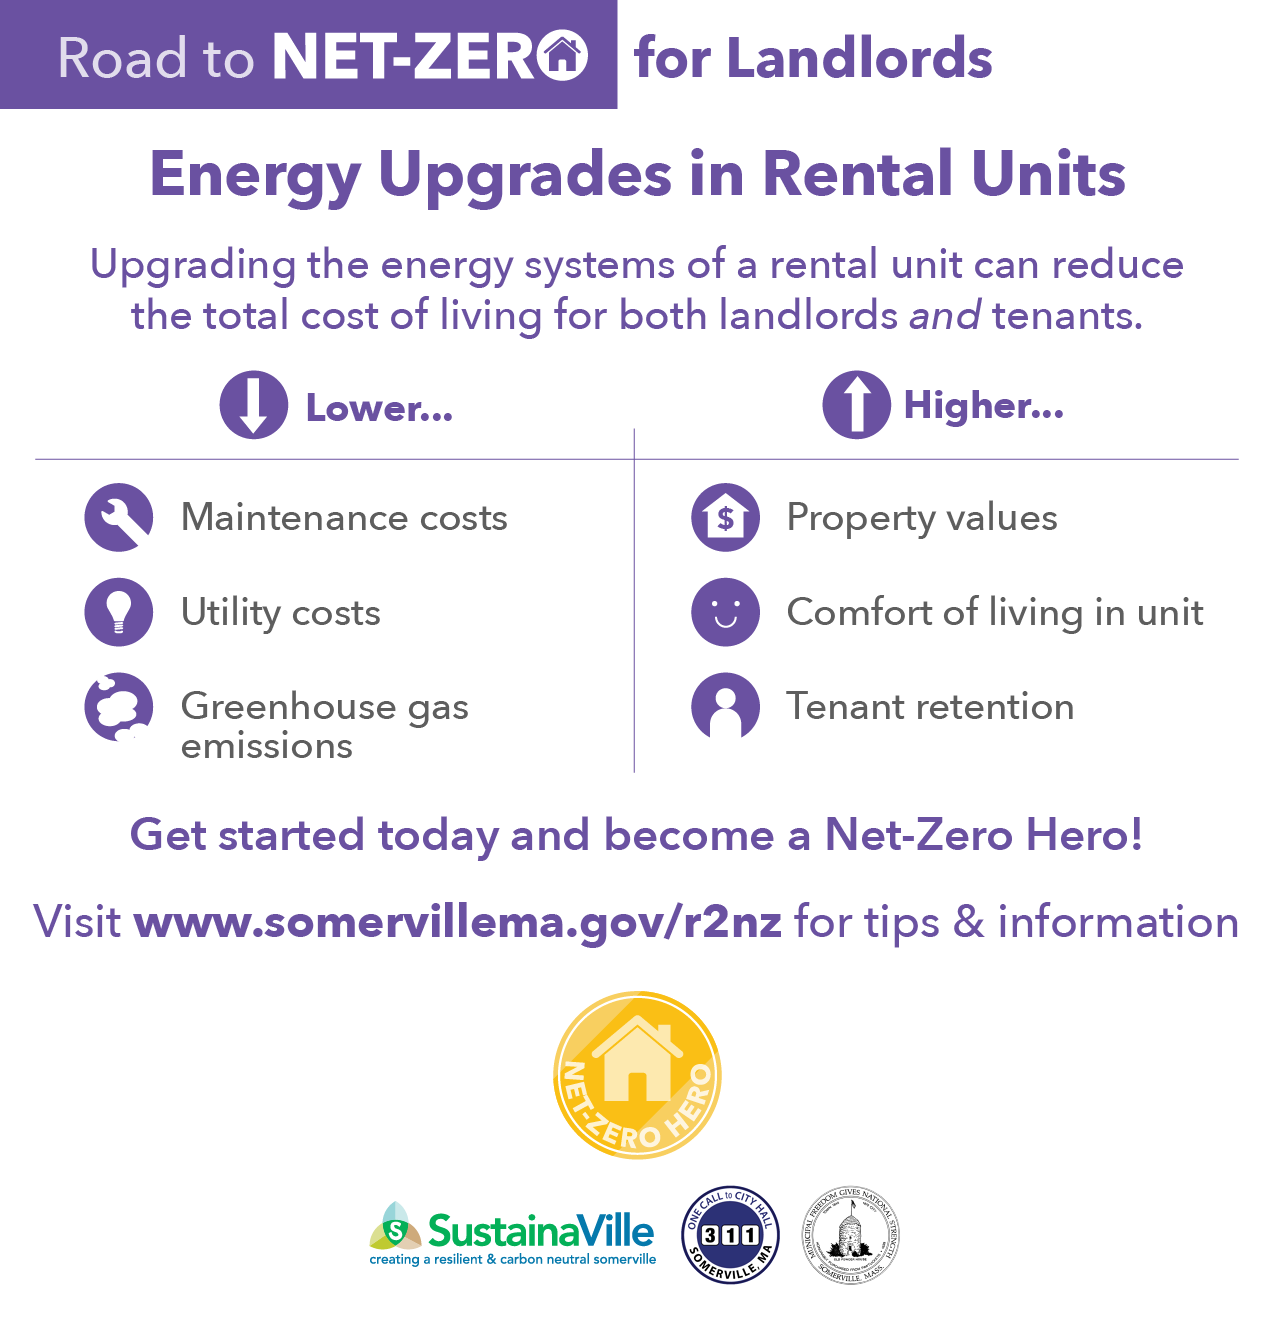 Upgrading the energy systems of a rental unit can lower maintenance costs and raise property values.